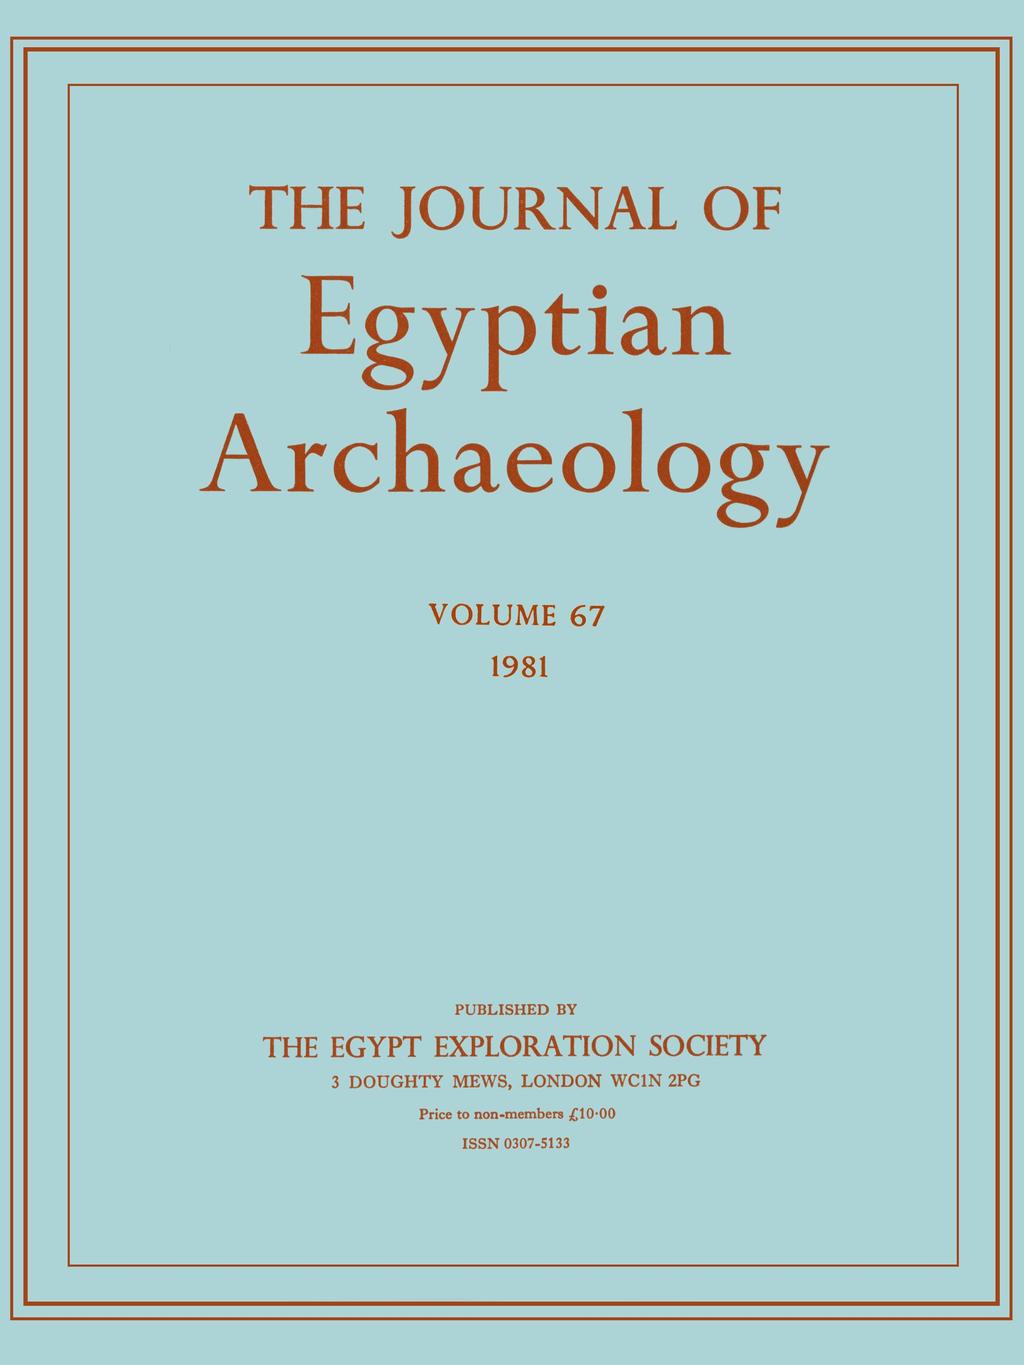 THE JOURNAL OF Egyptian Archaeology VOLUME 67 1981 PUBLISHED BY THE EGYPT